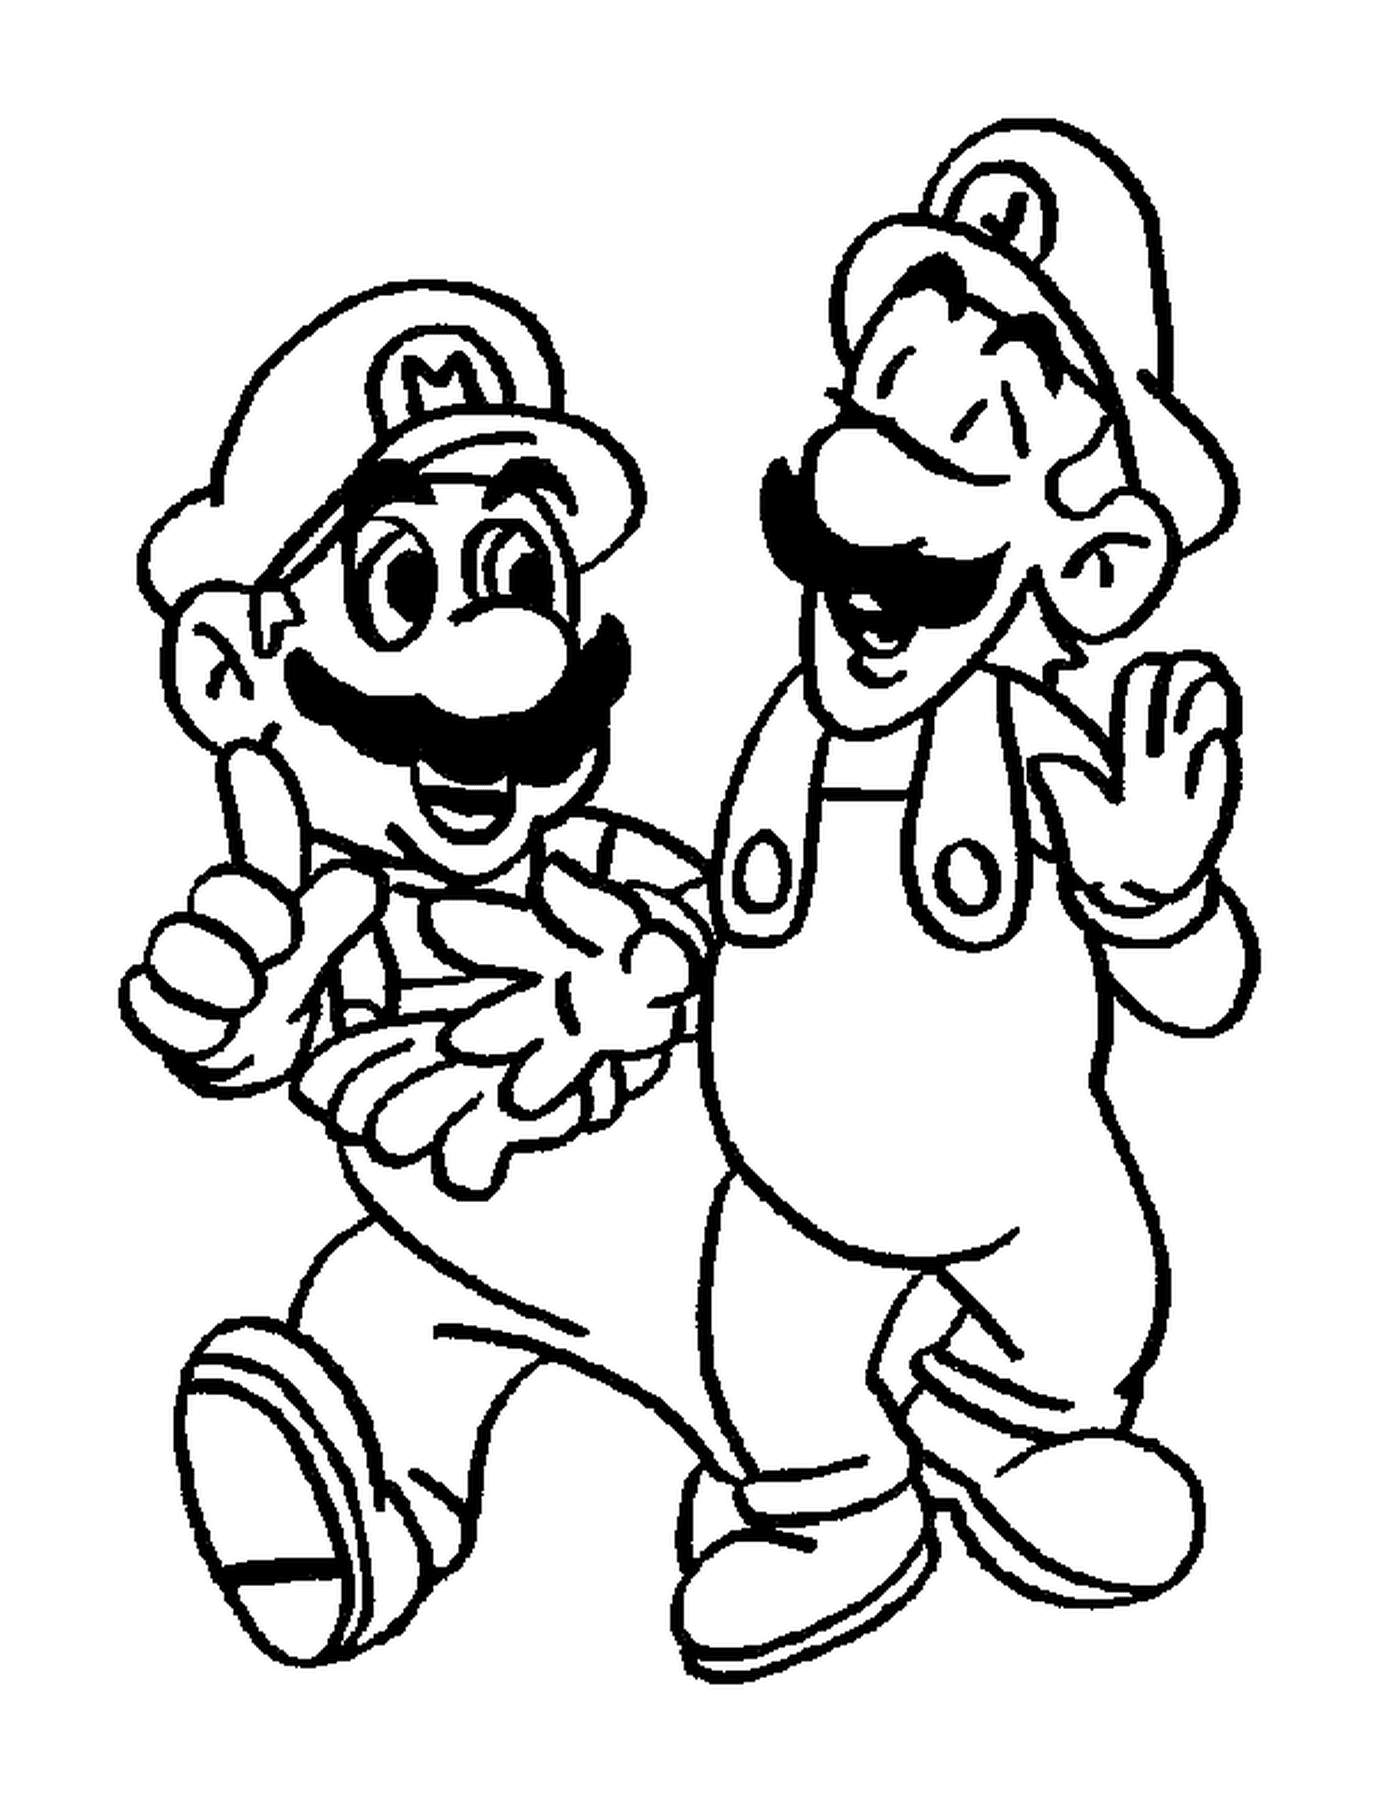  Luigi and Mario, two inseparable brothers 